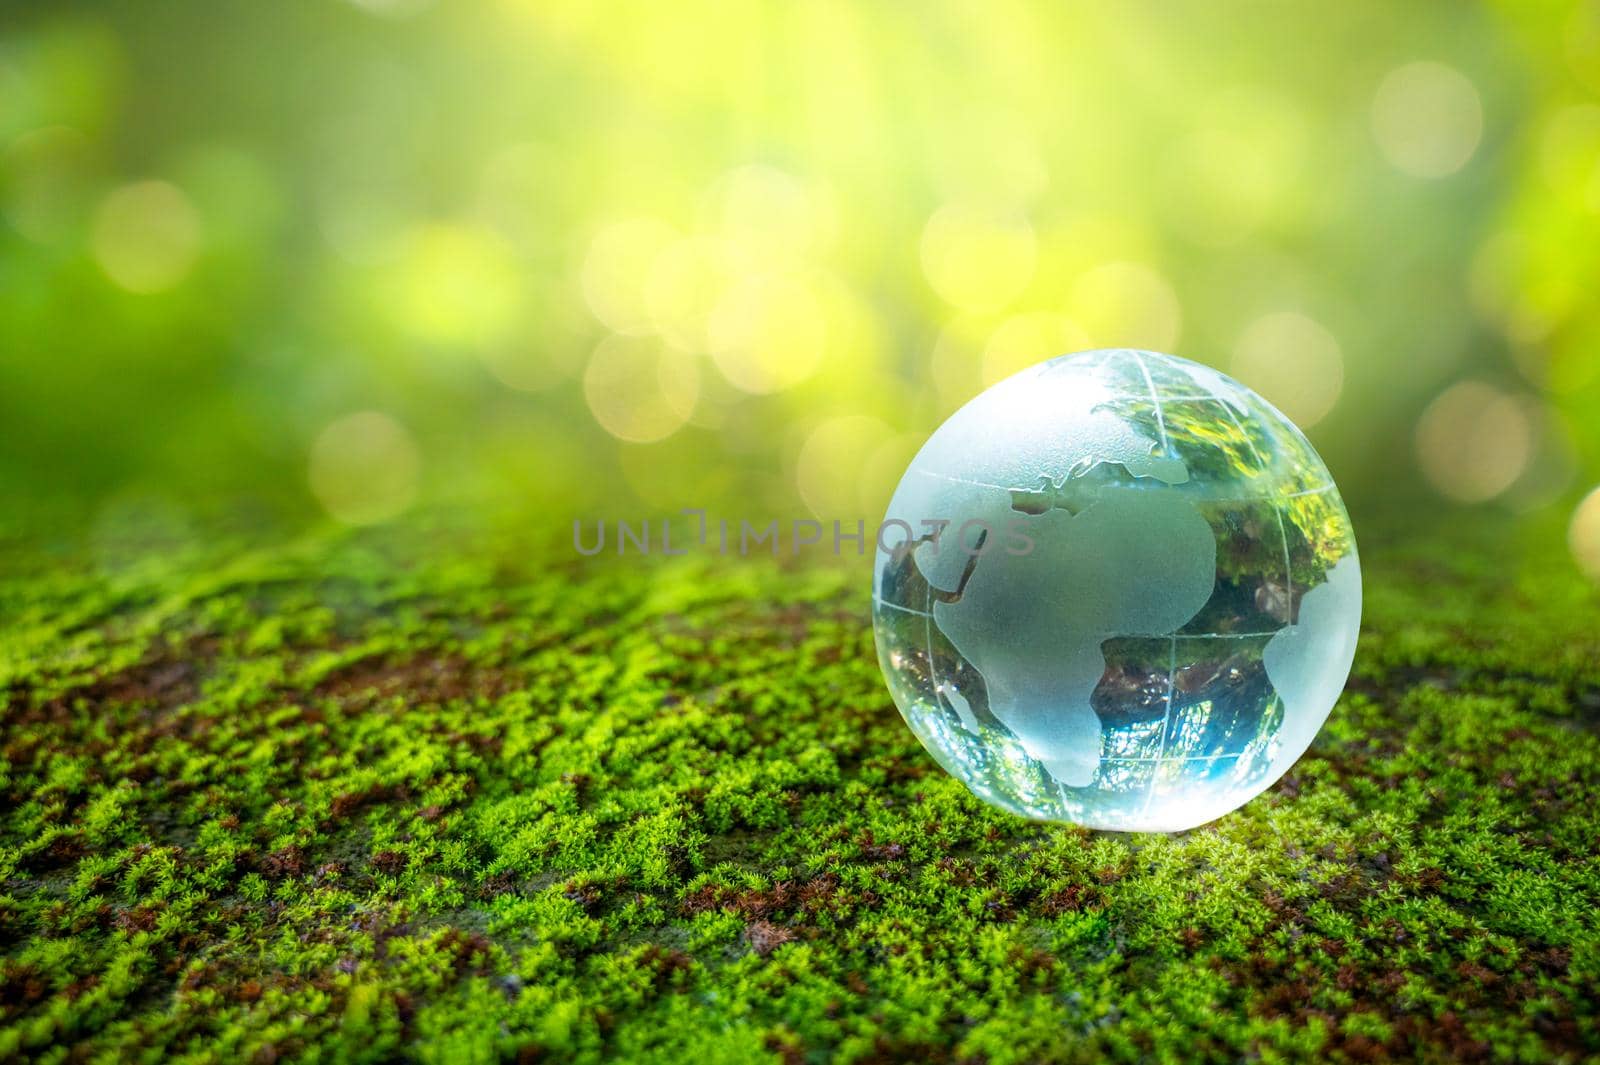 A man with a glass globe Concept day earth Save the world save environment The world is in the grass of the green bokeh background